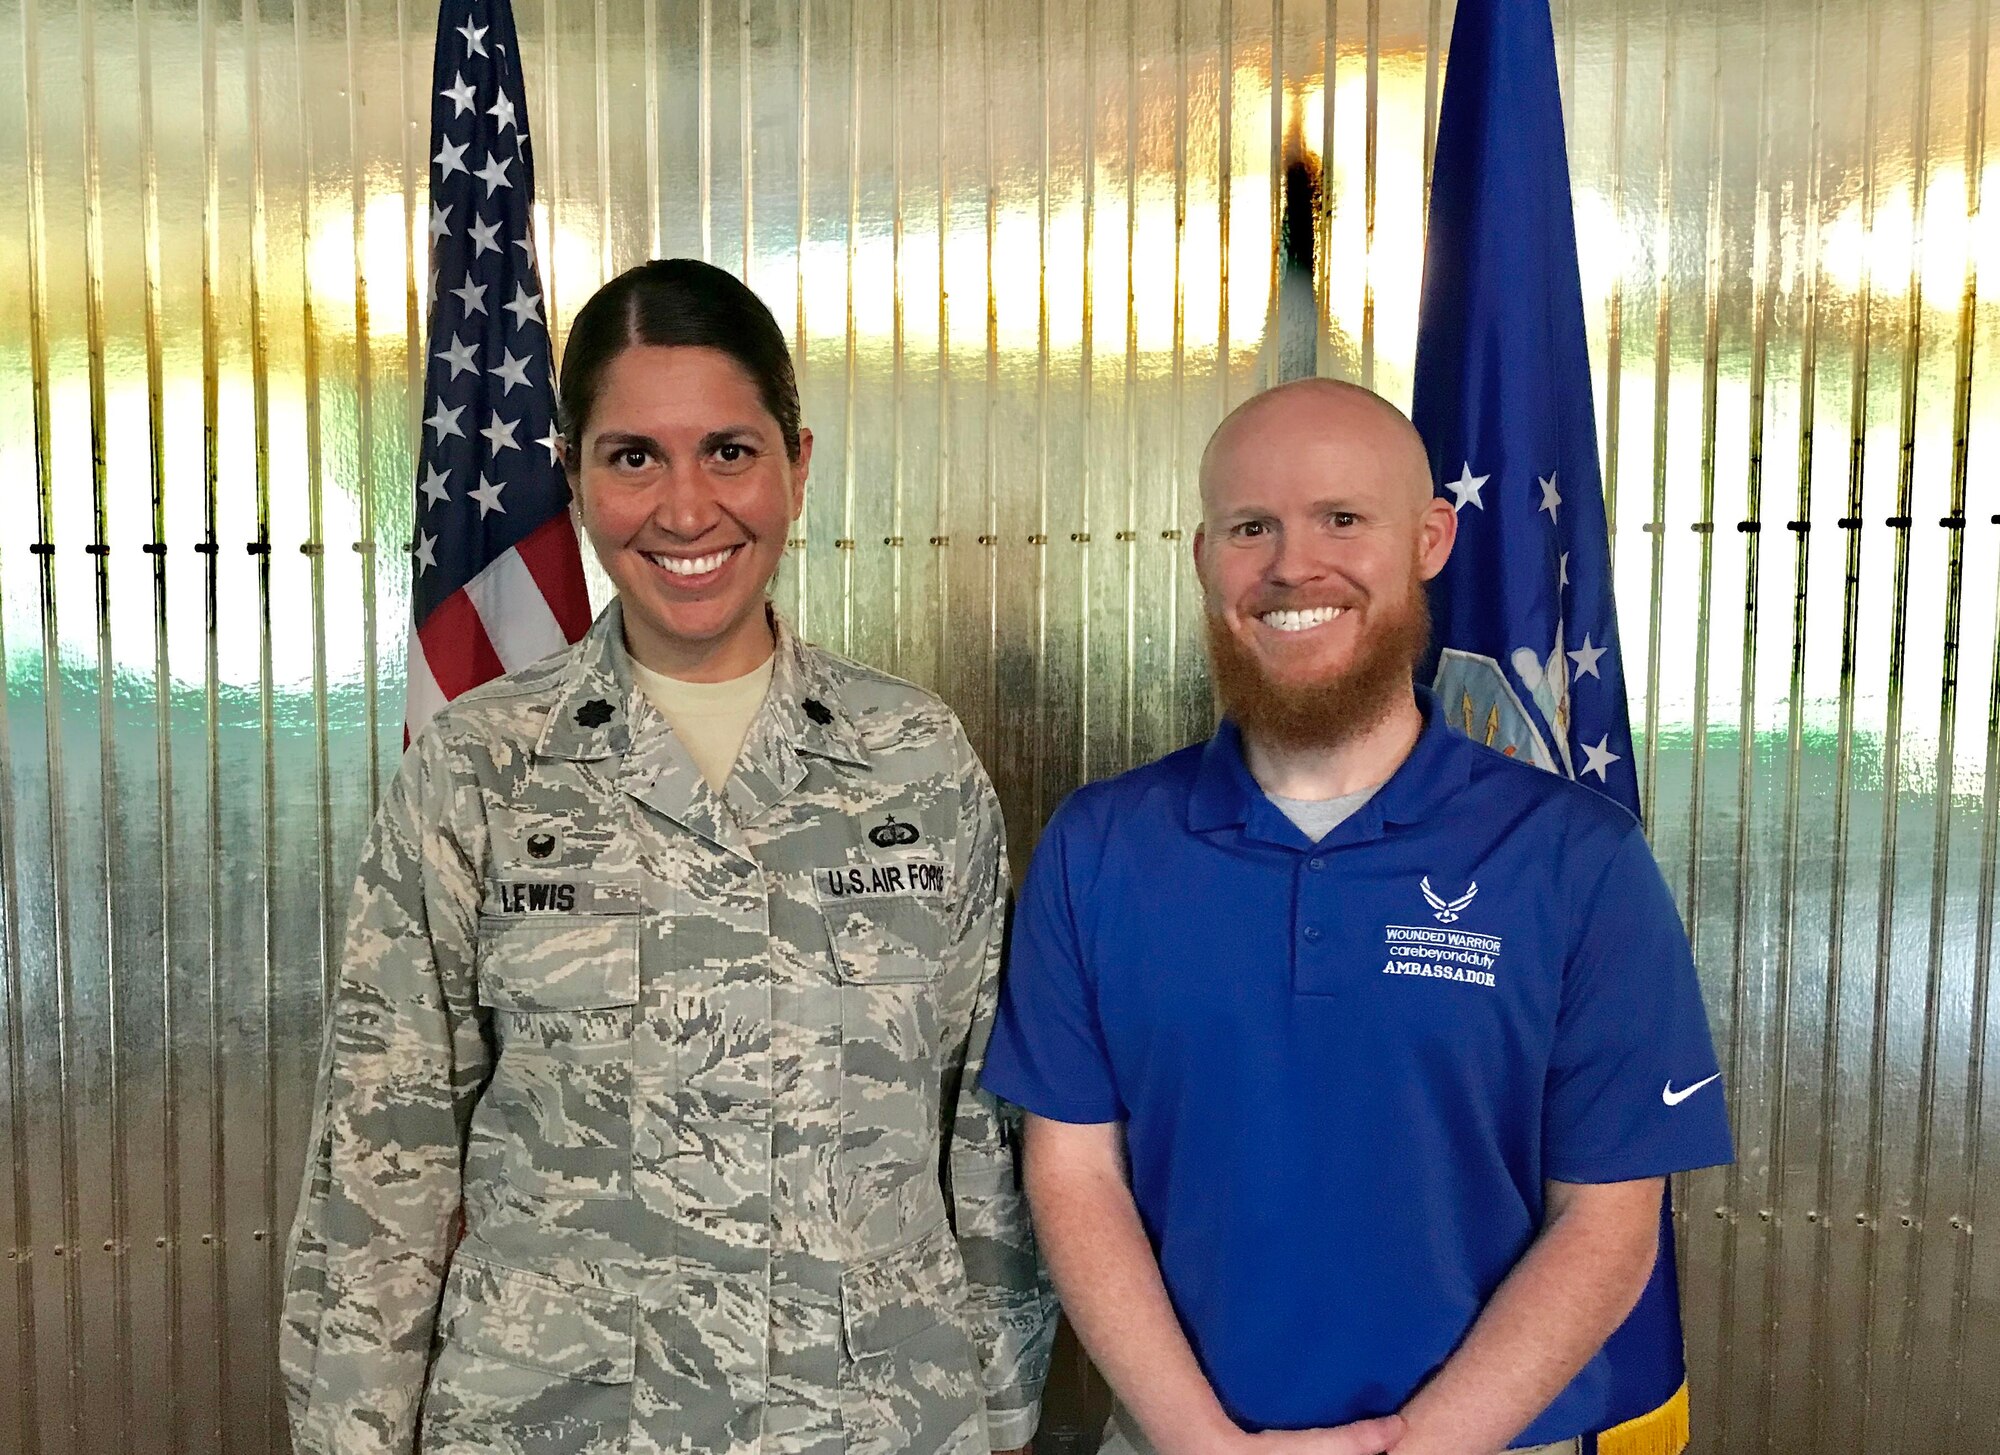 U.S. Air Force Lt. Col. Summer Lewis, 21st Force Support Squadron commander, stands with retired Staff Sgt. Cory Sandoval following a commander’s call at Peterson Air Force Base, Colorado, June 4, 2018. Sandoval shared his story with the squadron while sharing how the Air Force Wounded Warrior Program saved his life following a tragic accident several years ago. (U.S. Air Force photo by Alexx Pons)